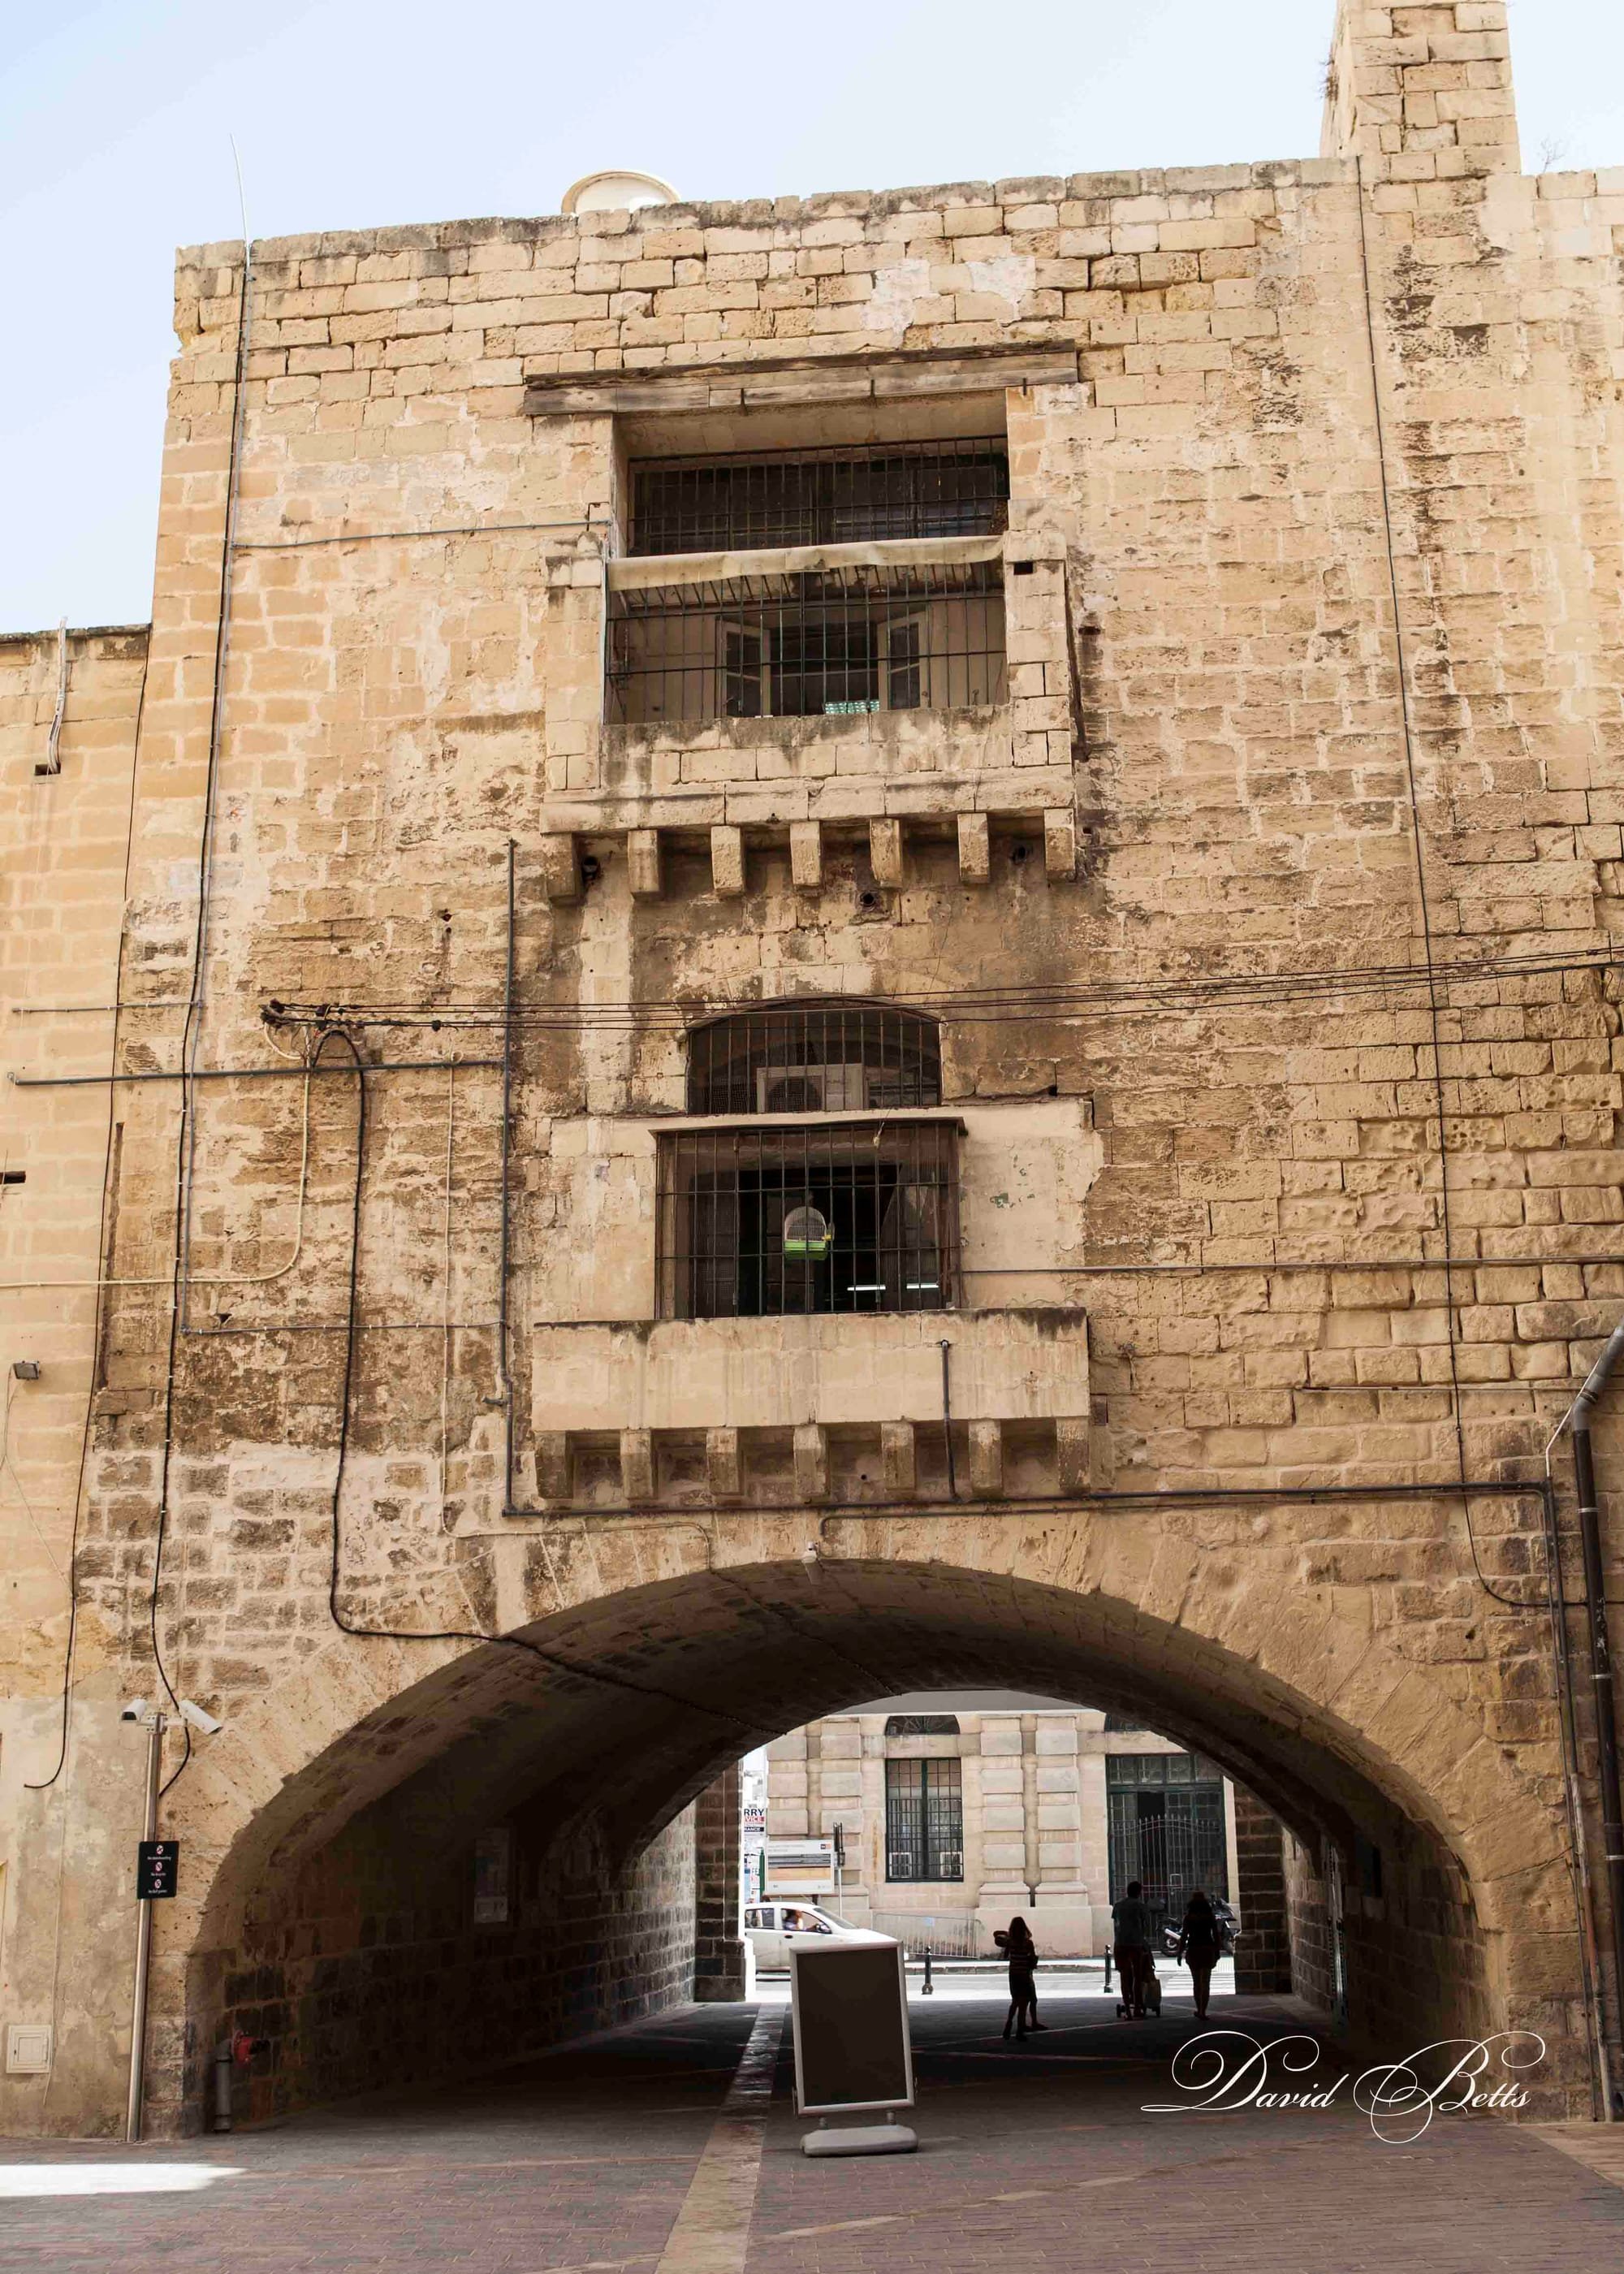 The Fortified Entrance opposite the Customs House